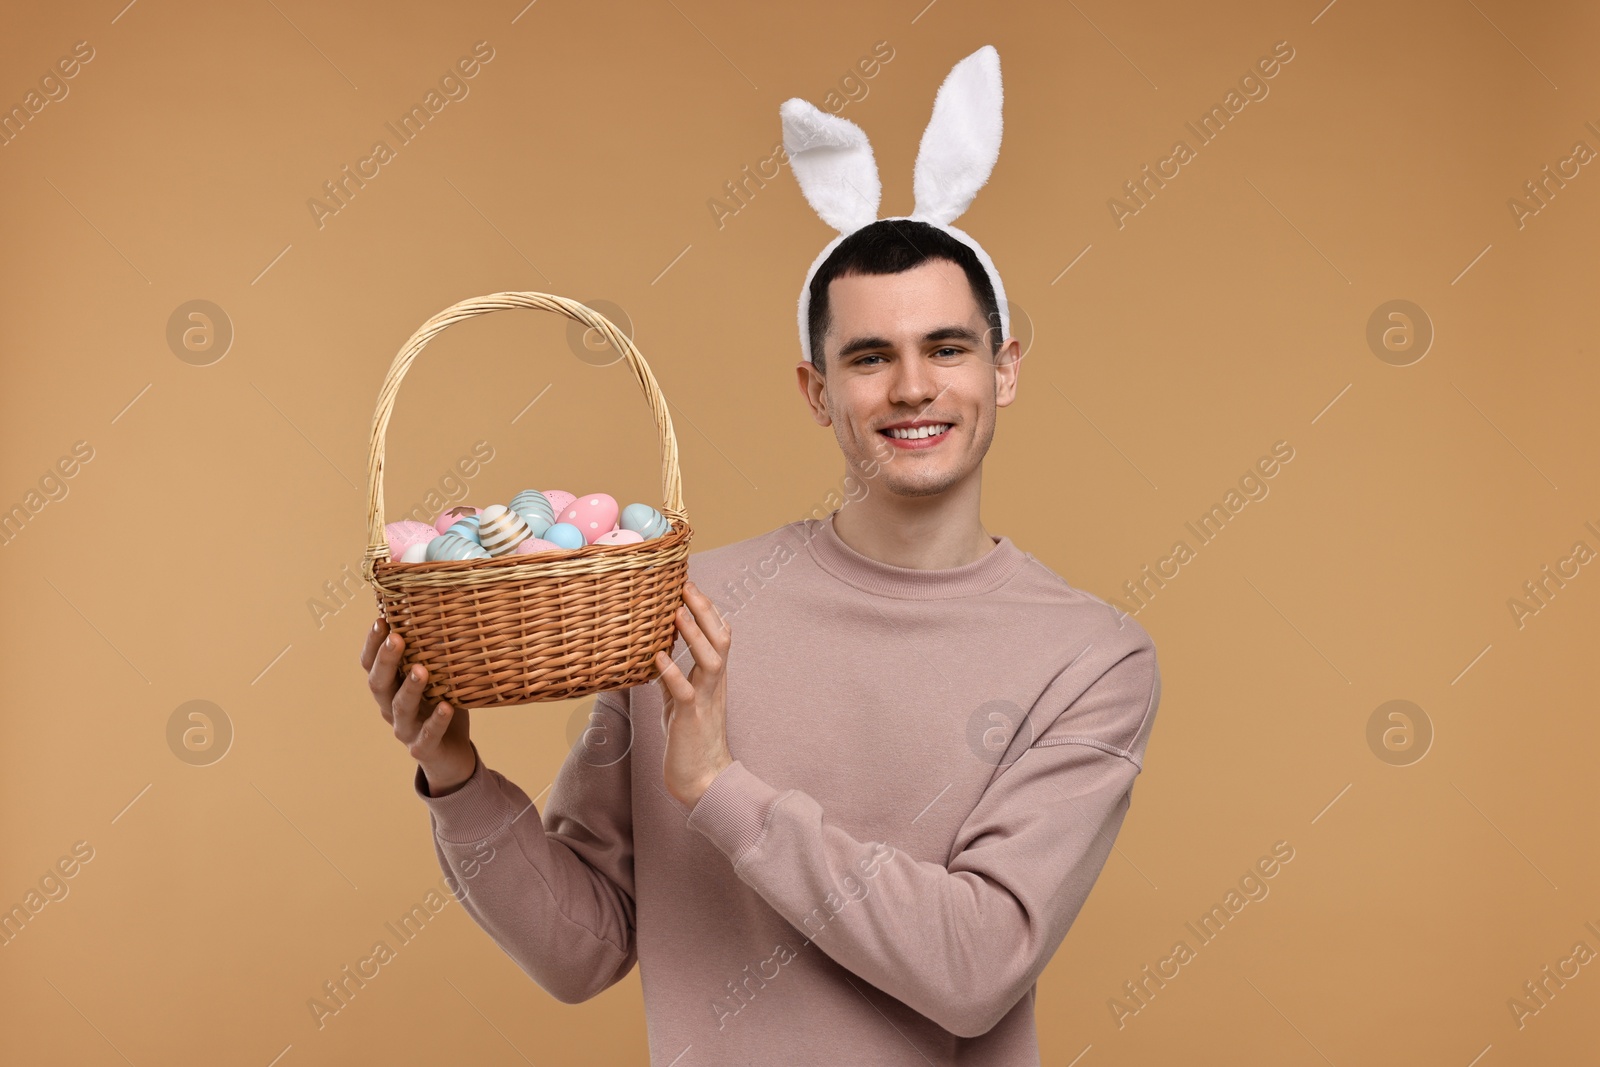 Photo of Easter celebration. Handsome young man with bunny ears holding basket of painted eggs on beige background